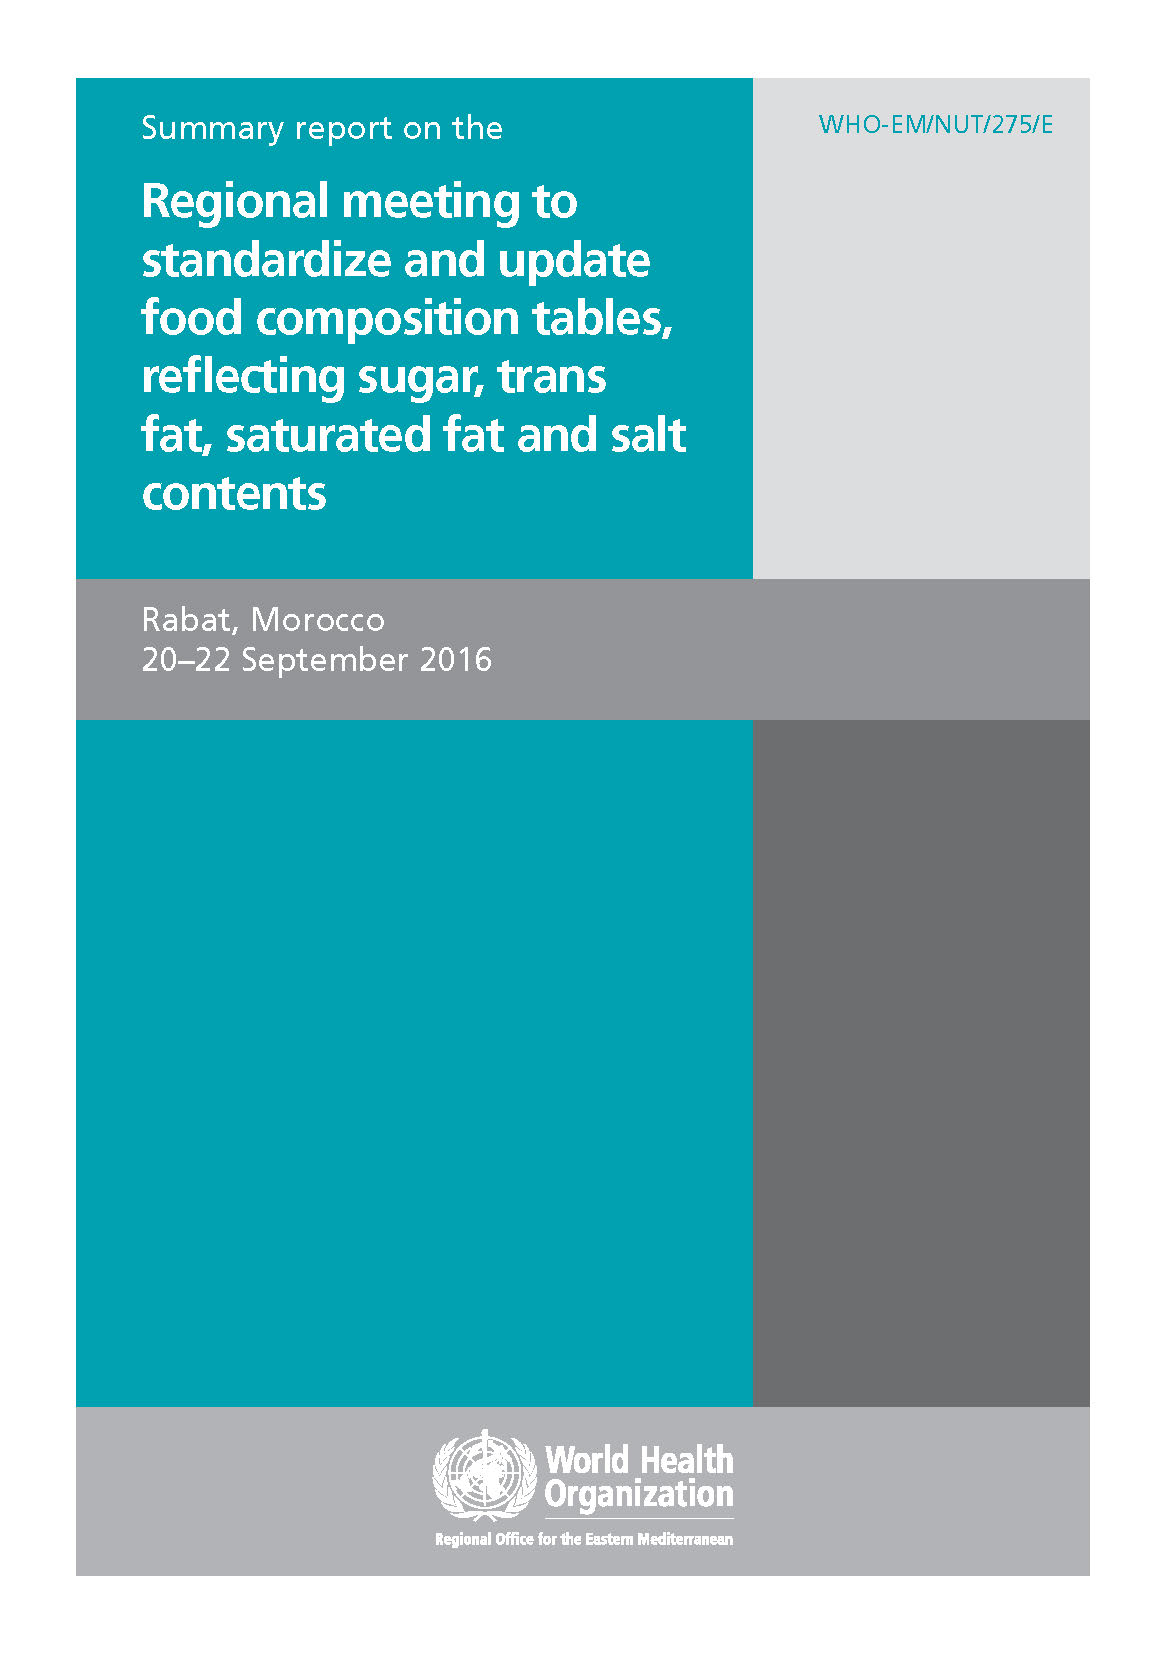 summary_report_on_the_regional_meeting_to_standardize_and_update_food_composition_tables_reflecting_sugar_trans_fat_saturated_fat_and_salt_contents